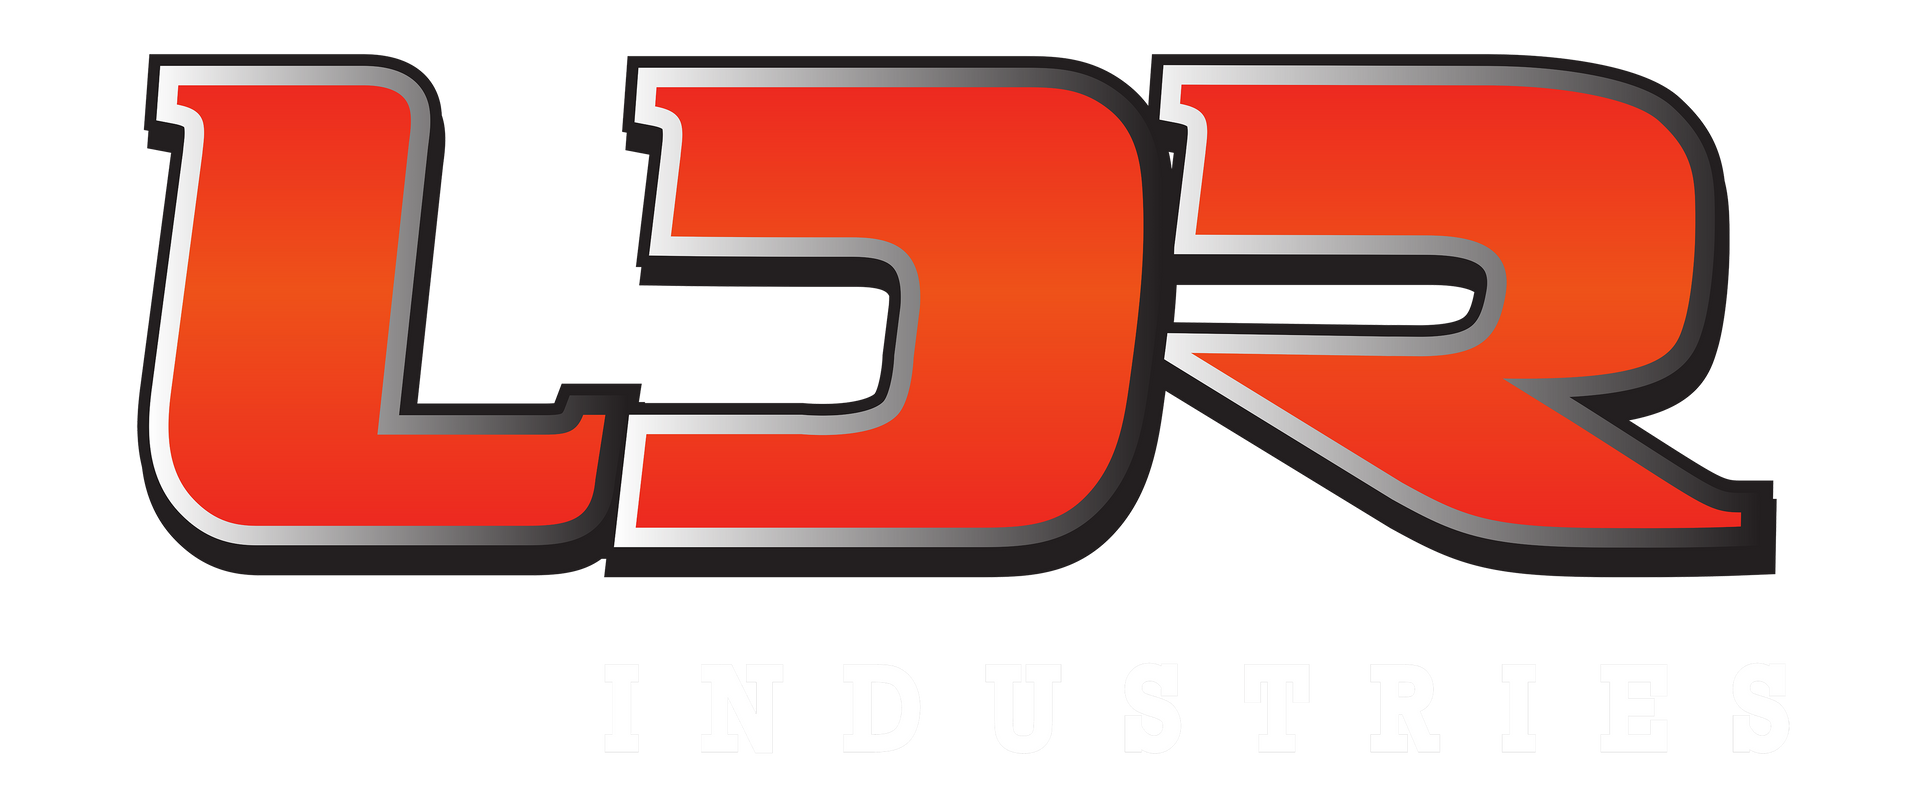 LDR Industries Truck toolboxes and accessories